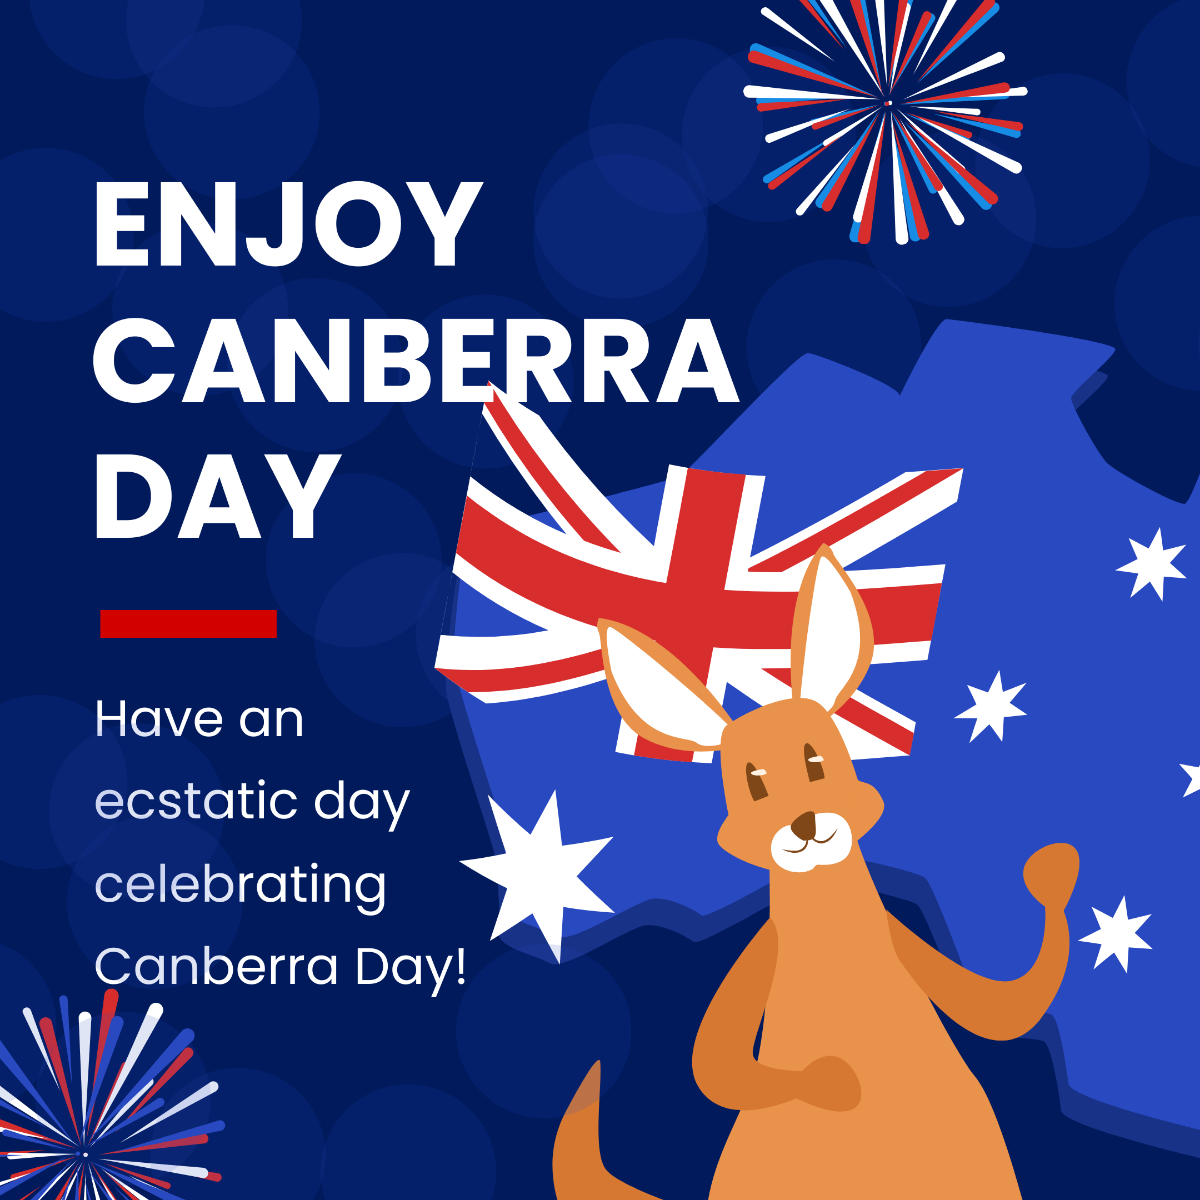 Canberra Day Instagram Post